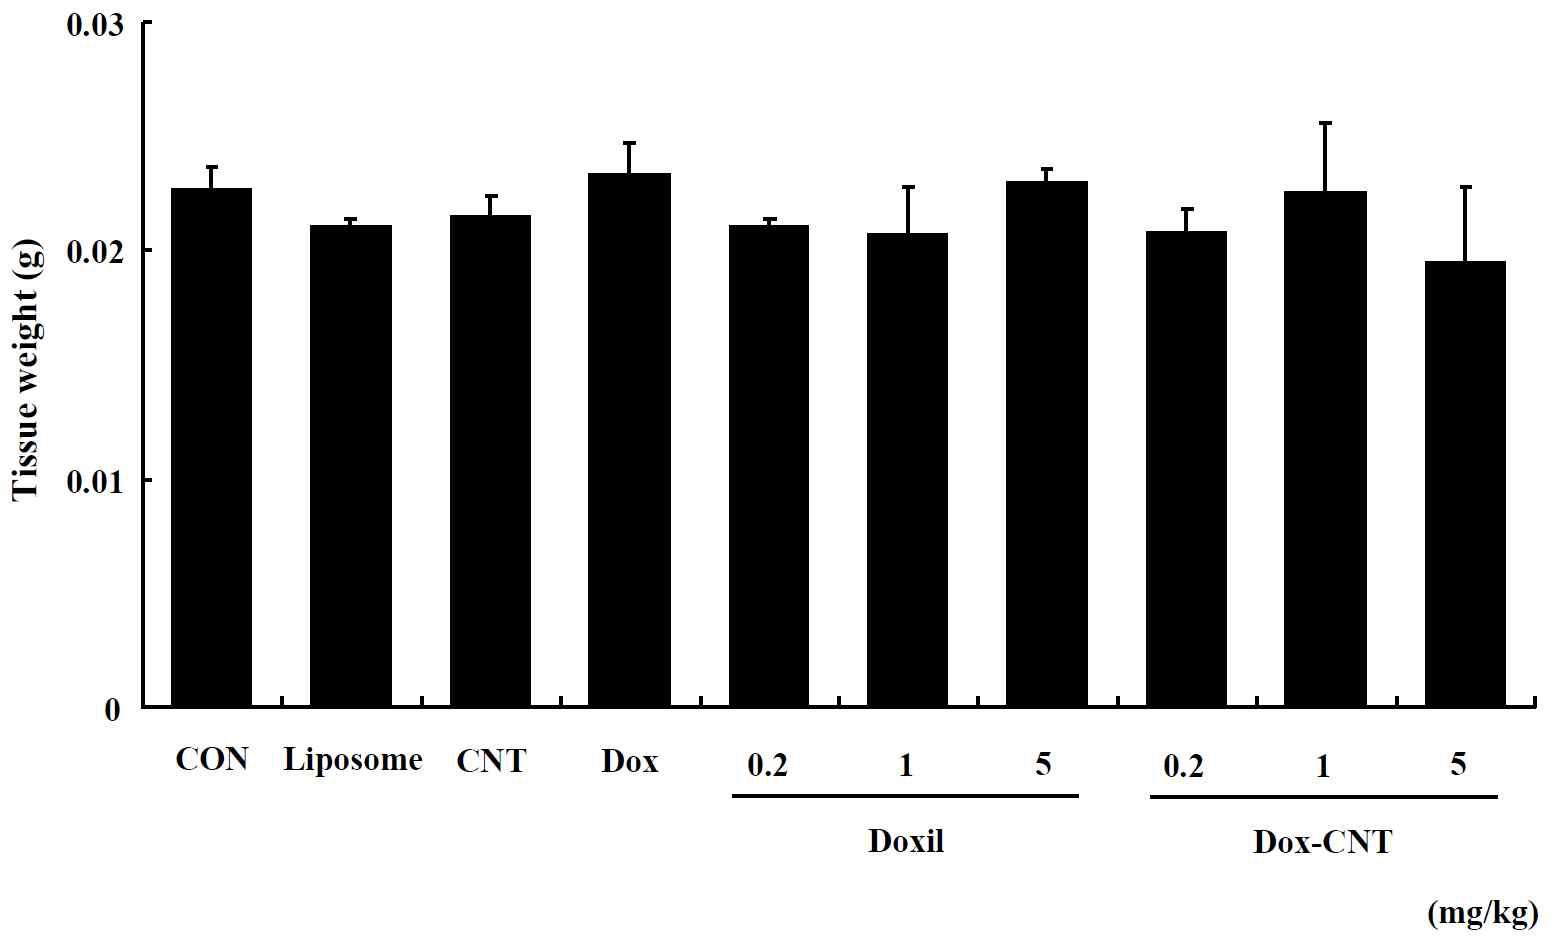 The change of lymph node weight in single exposed male ICR mice for 14 days. Mice were respectively administered by intravenous injection with liposome, CNT, Dox, Doxil (0.2, 1, 5 mg/kg) and Dox-CNT (0.2, 1, 5 mg/kg). The results are presented as mean ± SE (n = 10). * p < 0.05, significantly different from the control.